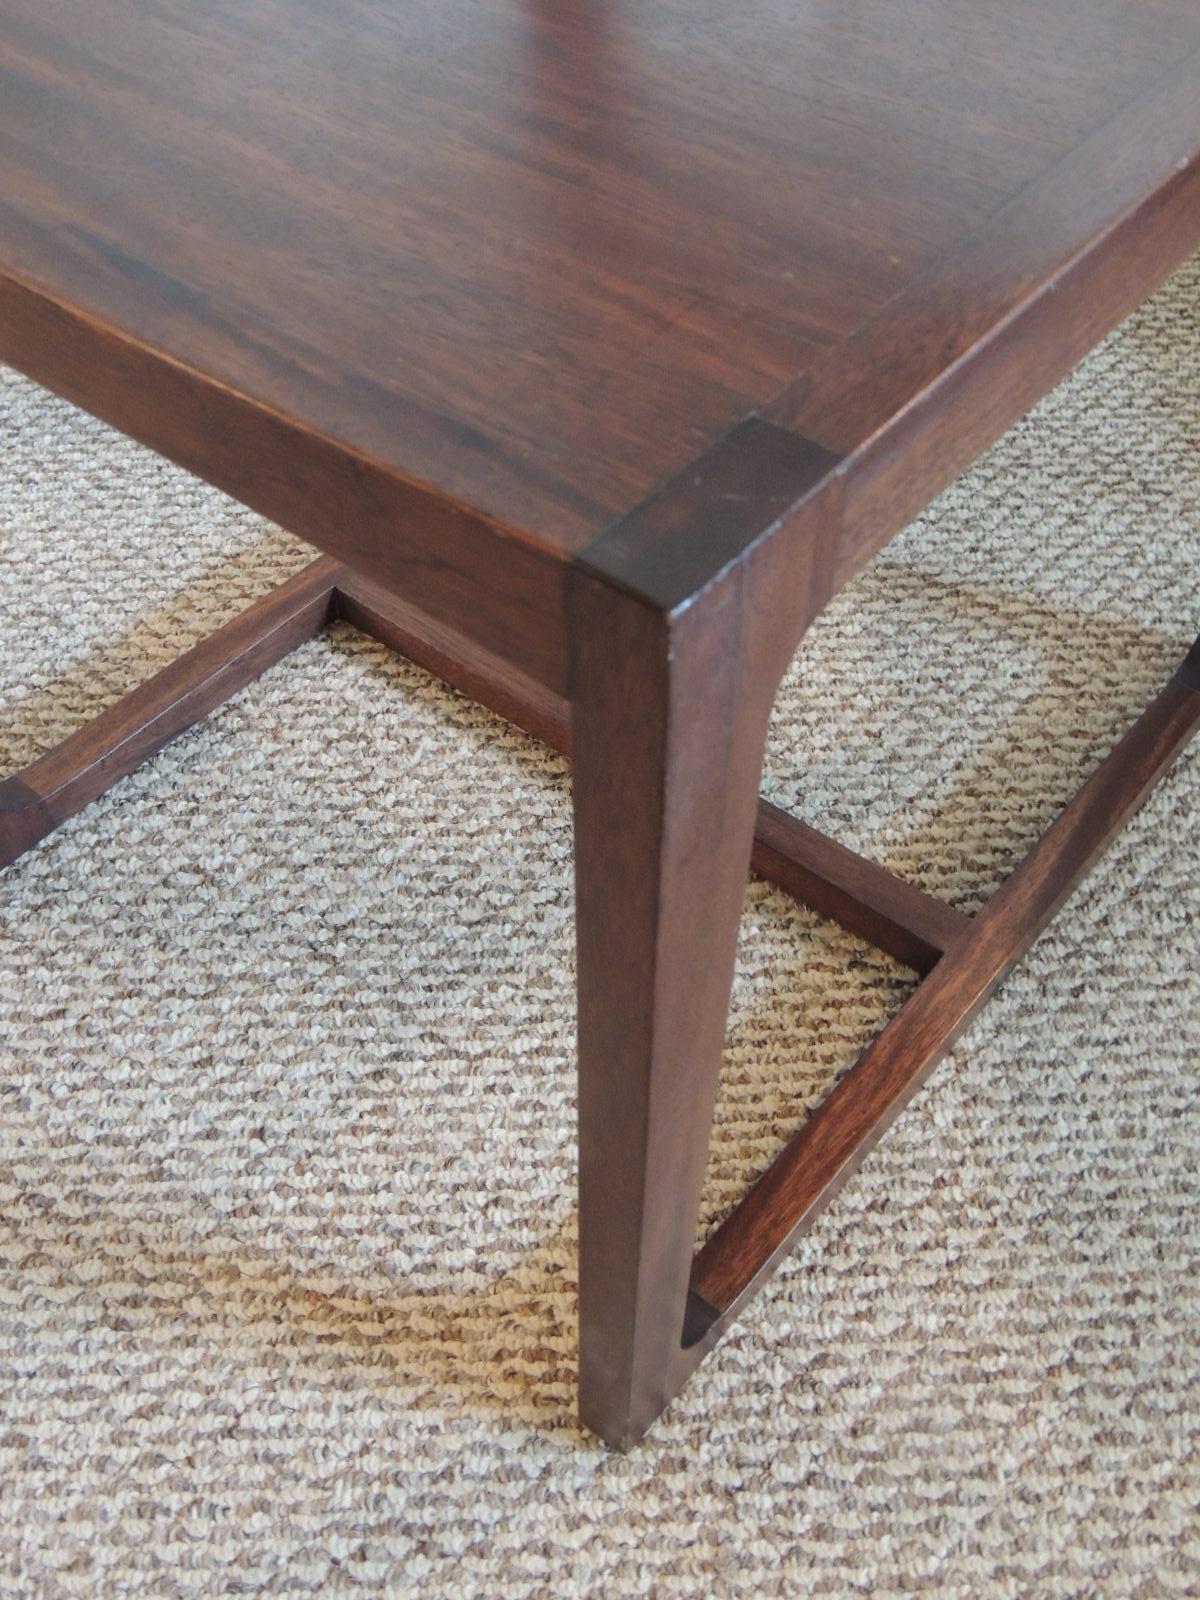 Hand-Crafted Contemporary Brazilian Hardwood Desk Side Chair Handcrafted in Brazil